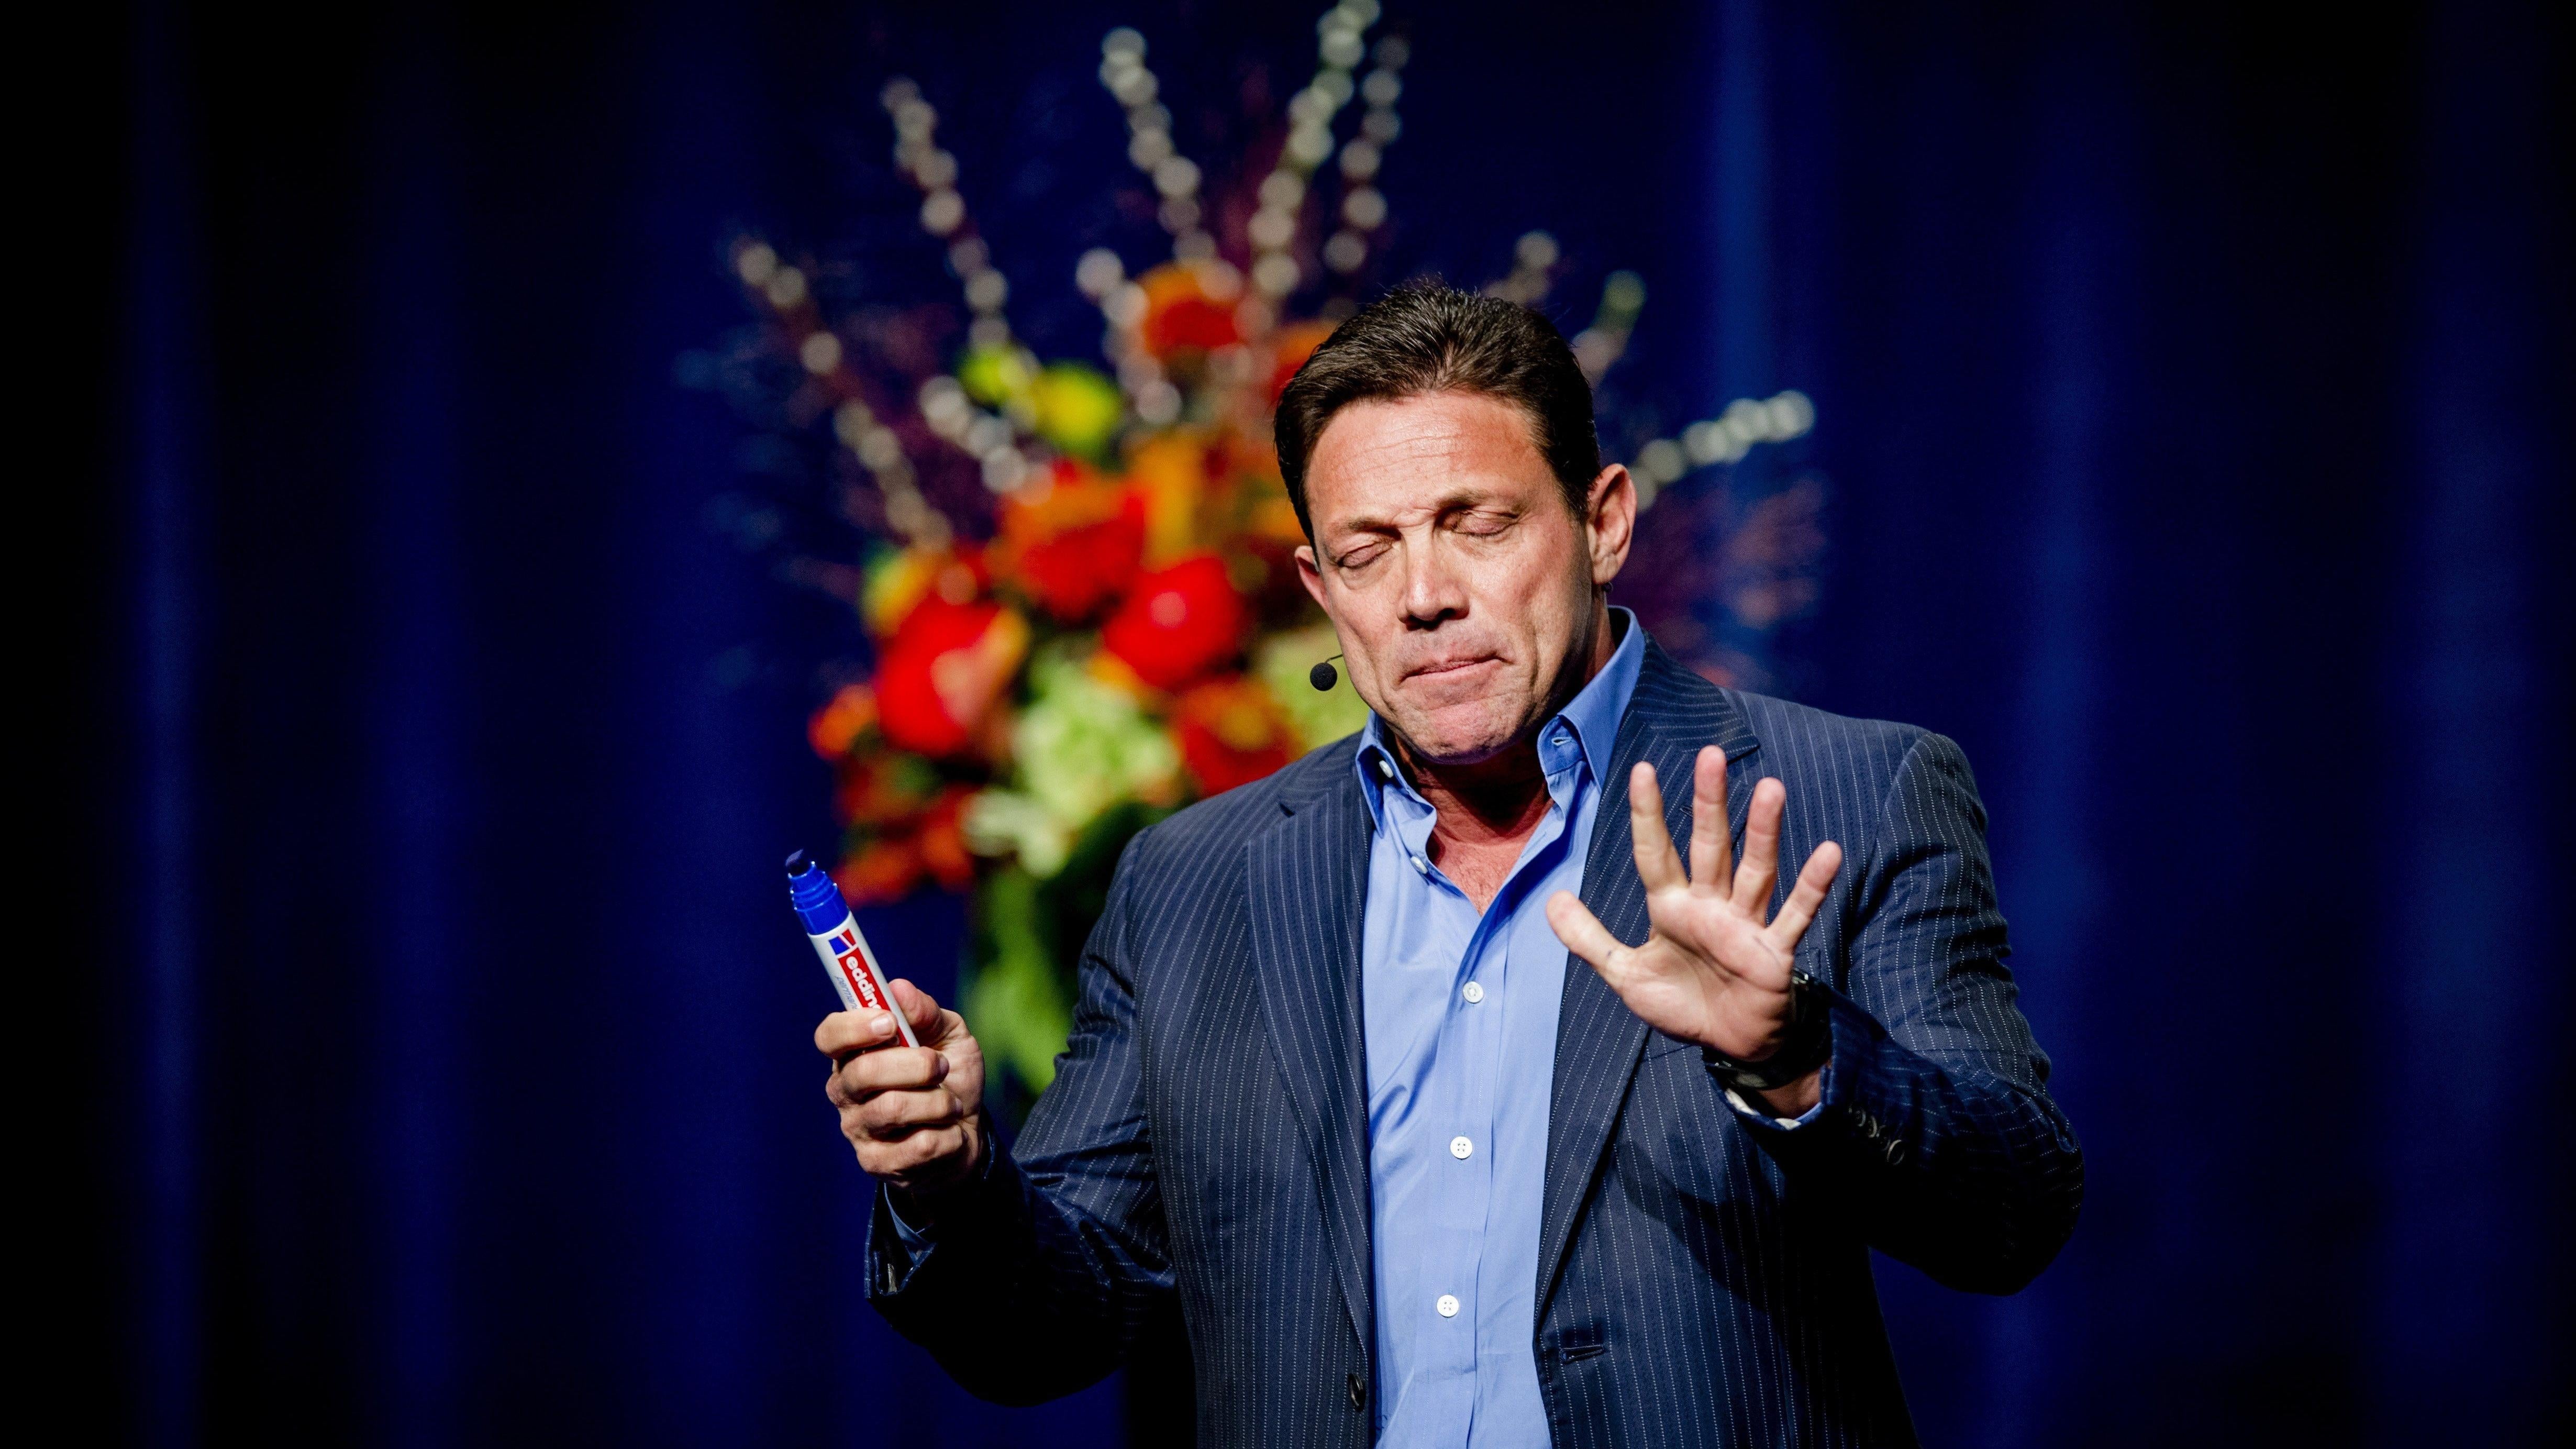 Jordan Belfort had long been on the talk circuit, trying to convince people that inherent greed really isn't all that bad. And now the guy's sunk his teeth into crypto. (Photo: ROBIN VAN LONKHUIJSEN/AFP, Getty Images)